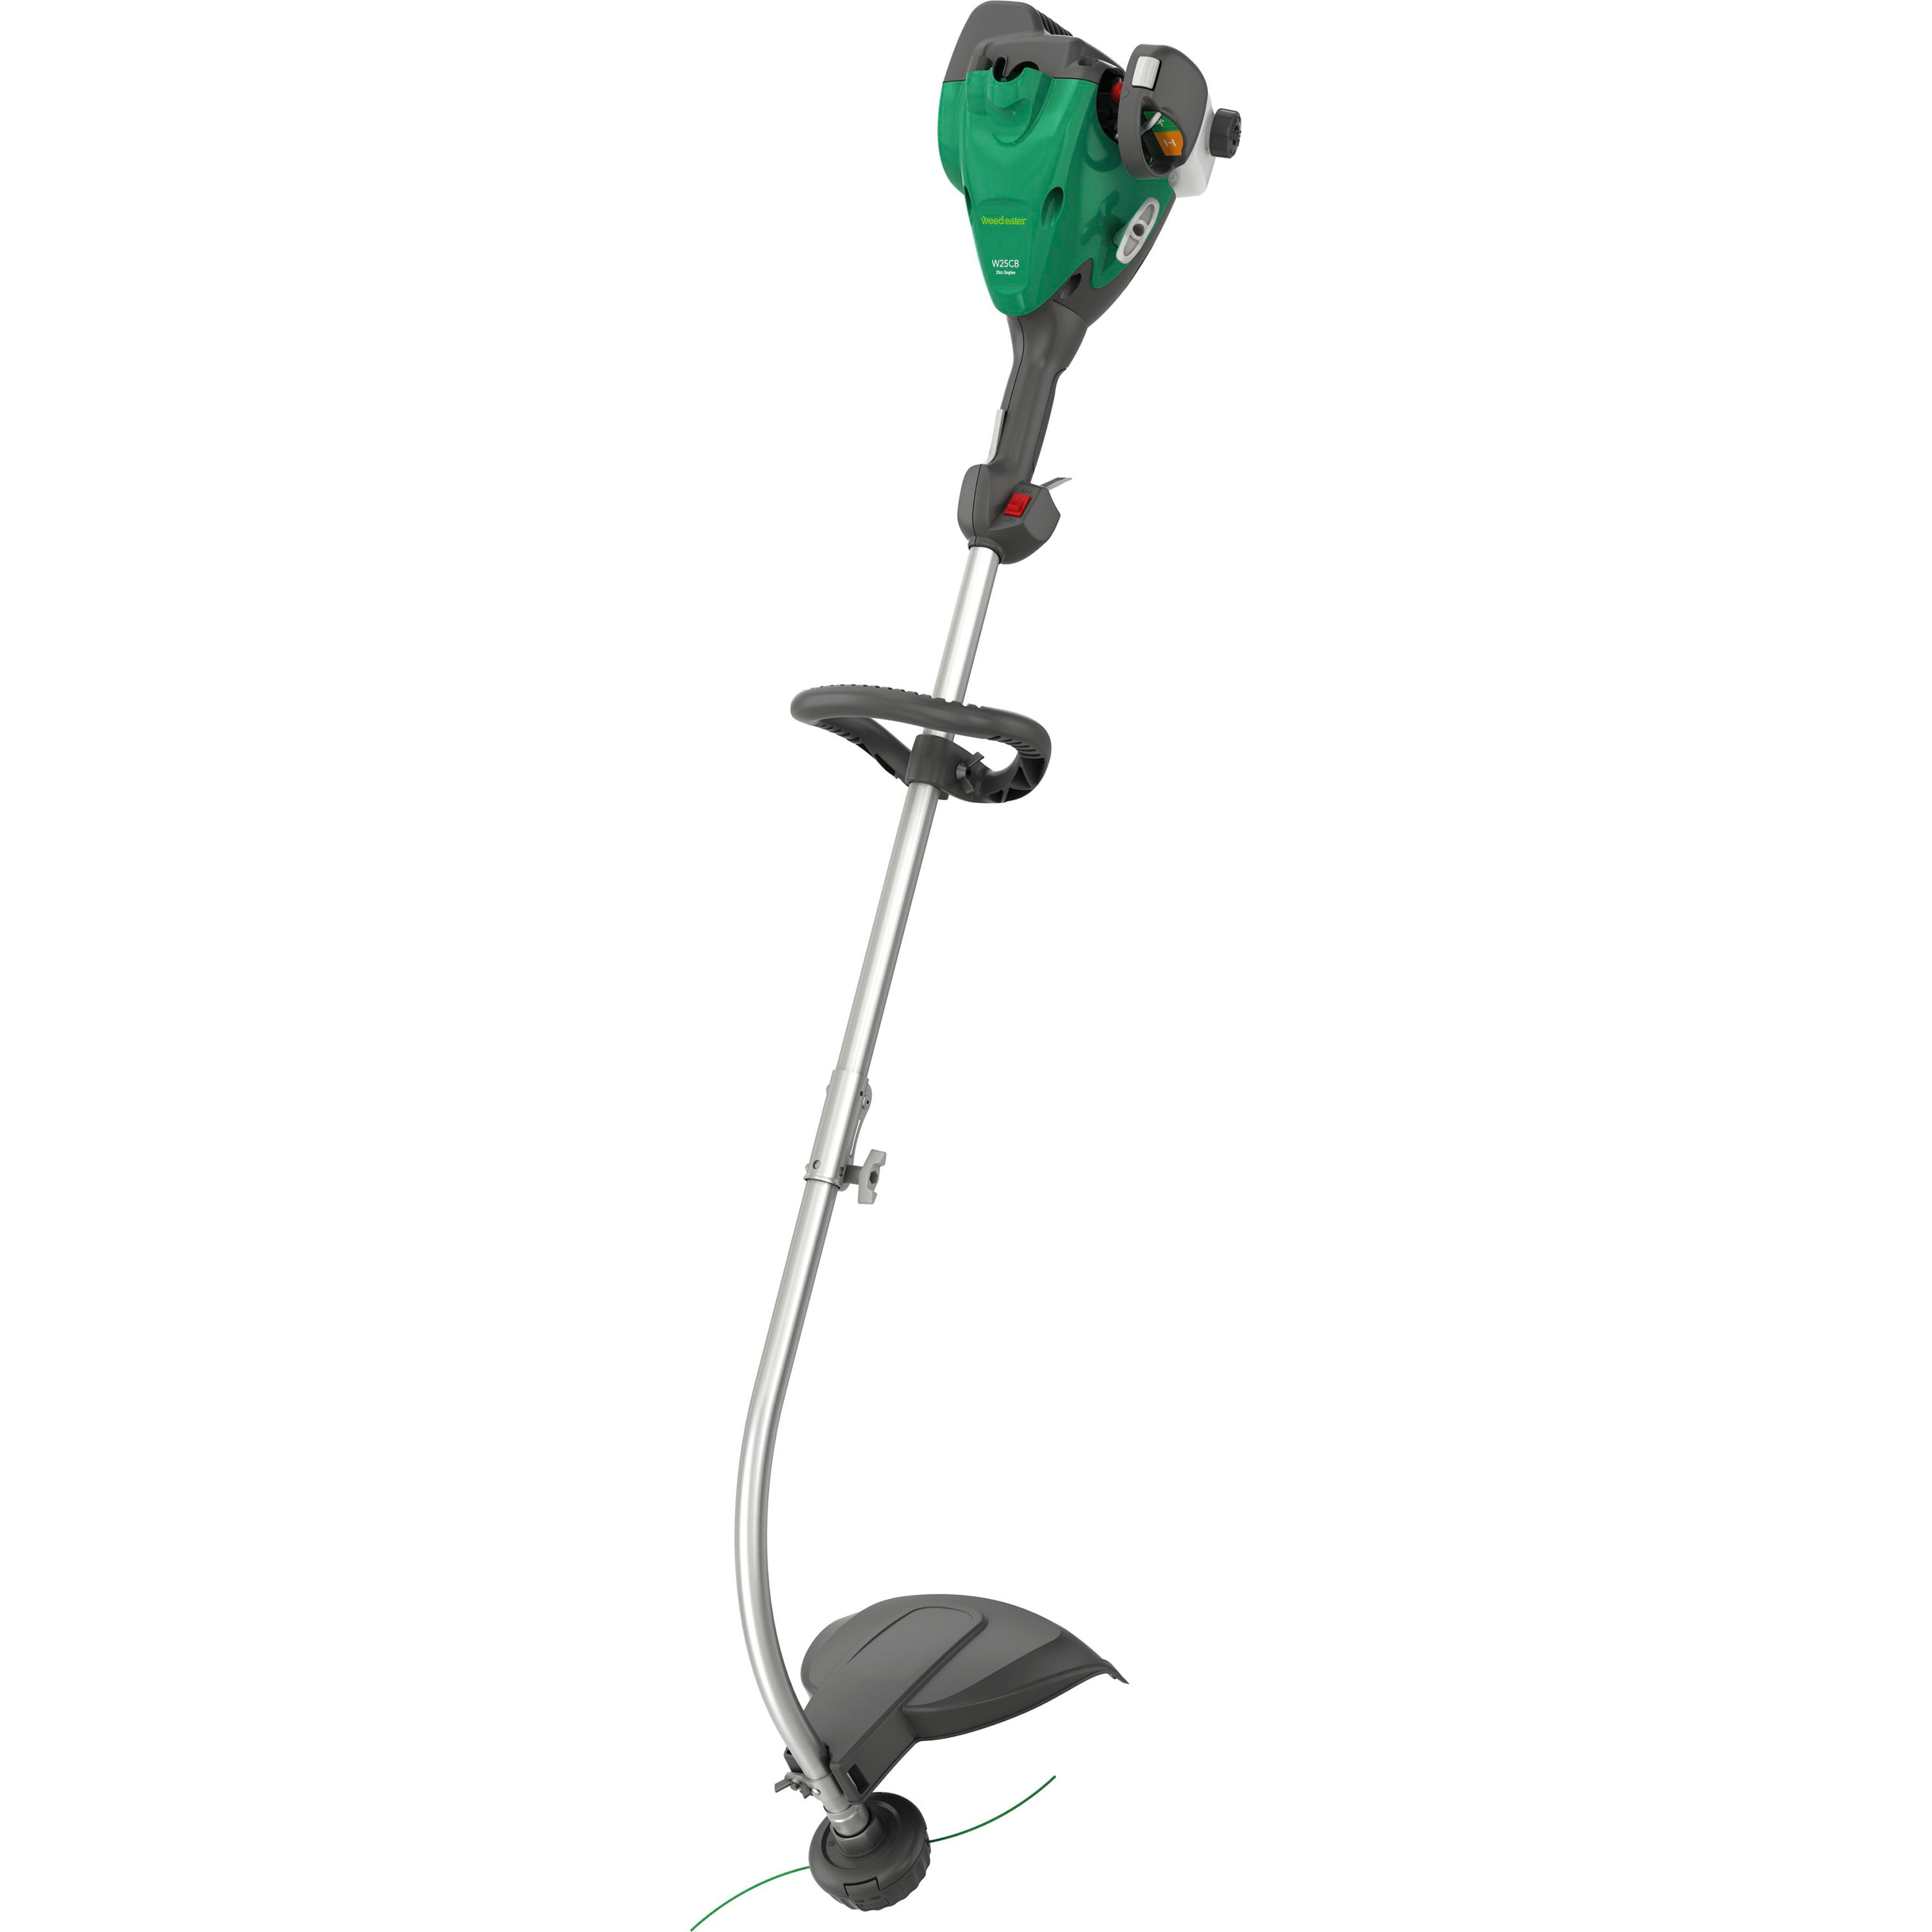 Weed Eater 25cc Curved Shaft 16 in. String Trimmer, W25CB ...